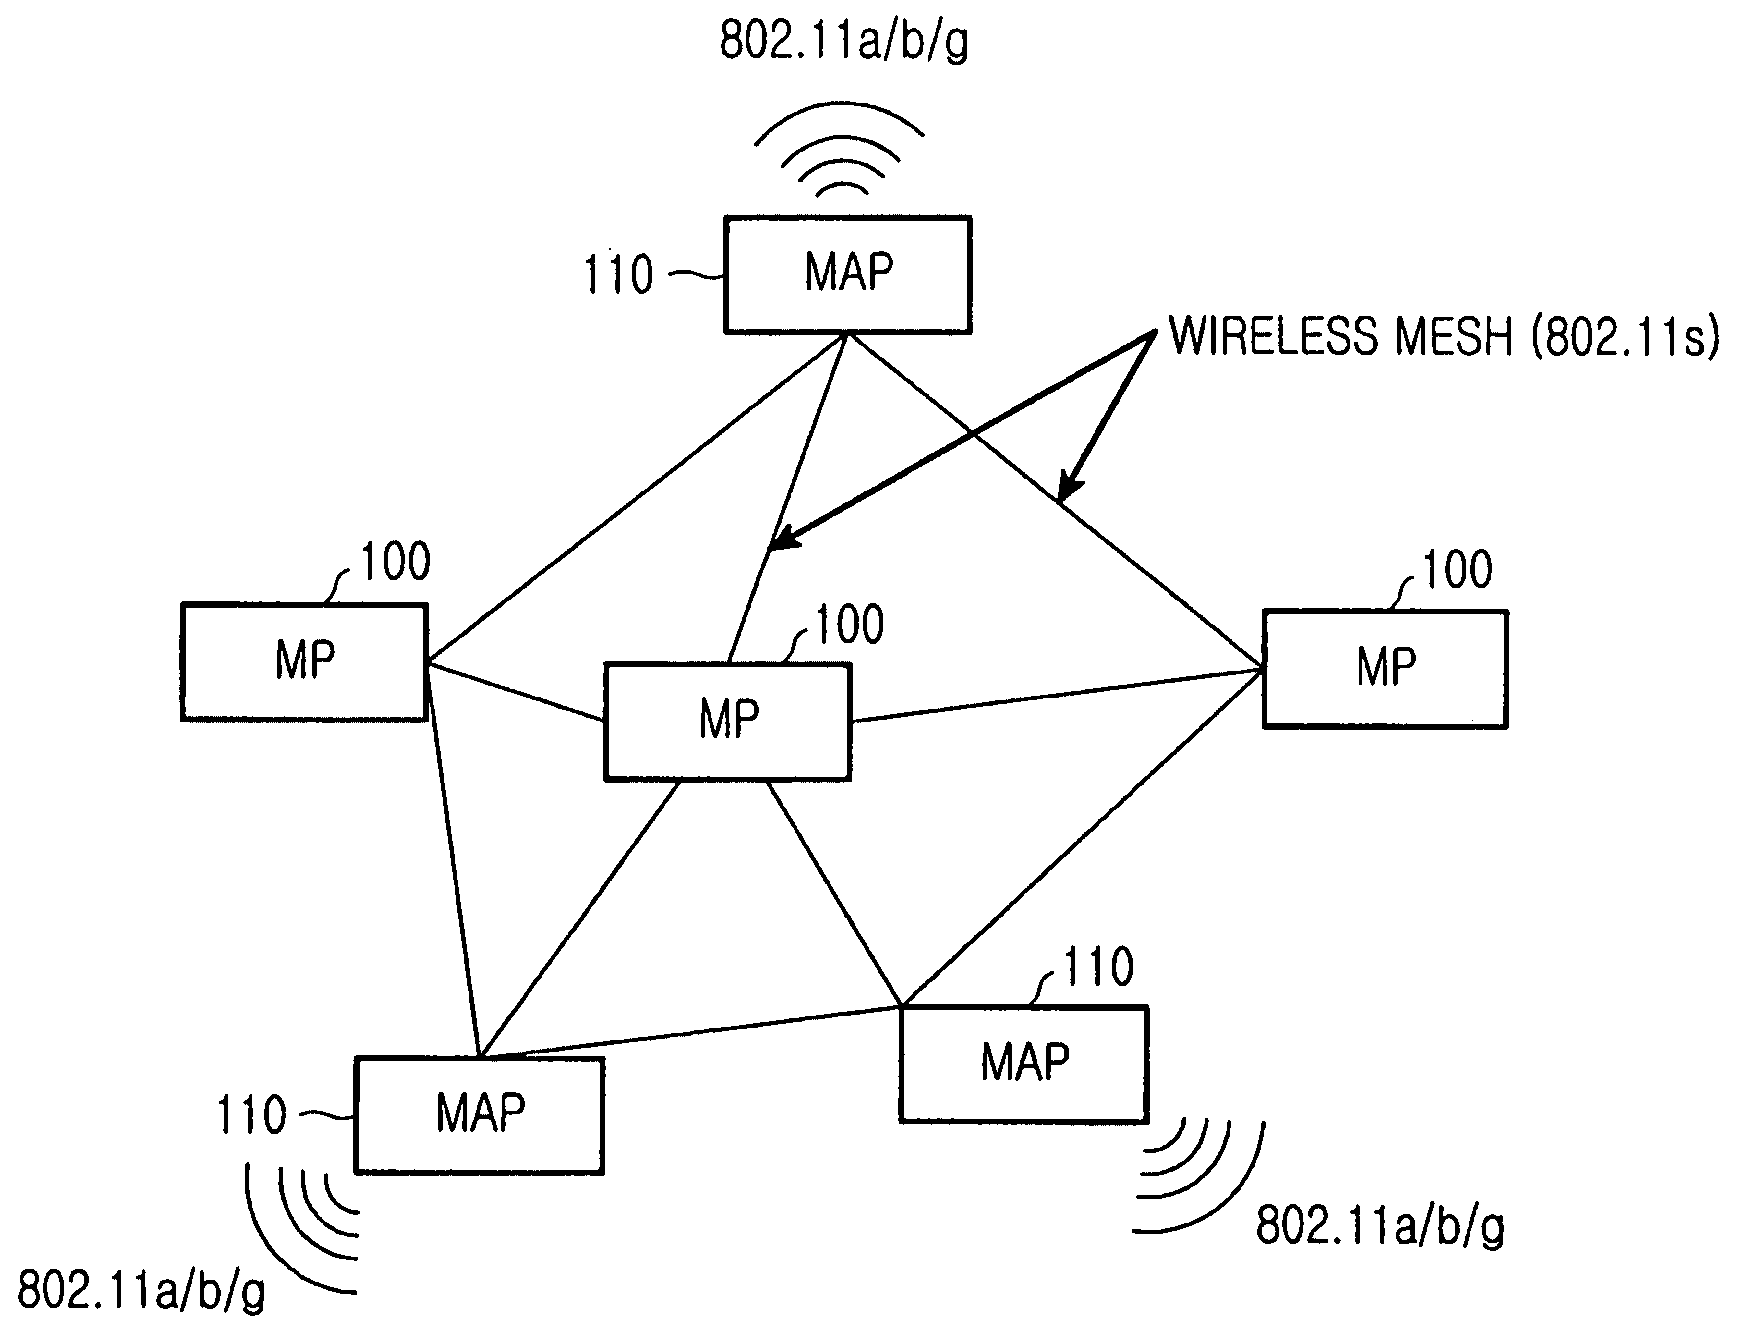 Multi-channel MAC apparatus and method for WLAN devices with single radio interface